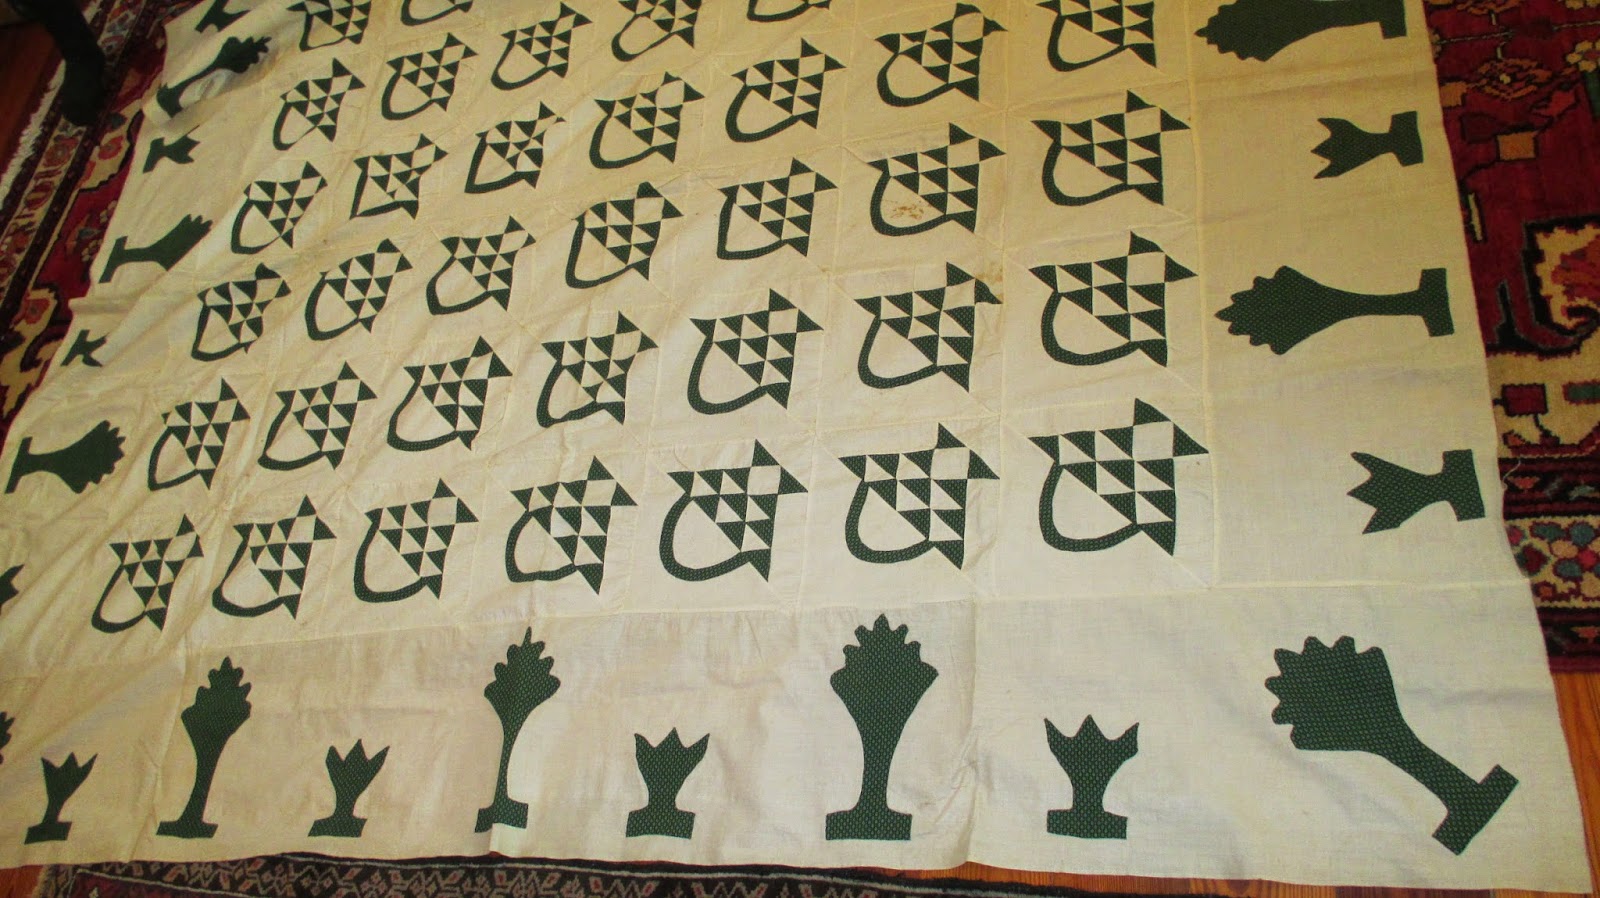 The Literate Quilter: Poison And Other 19th c Greens